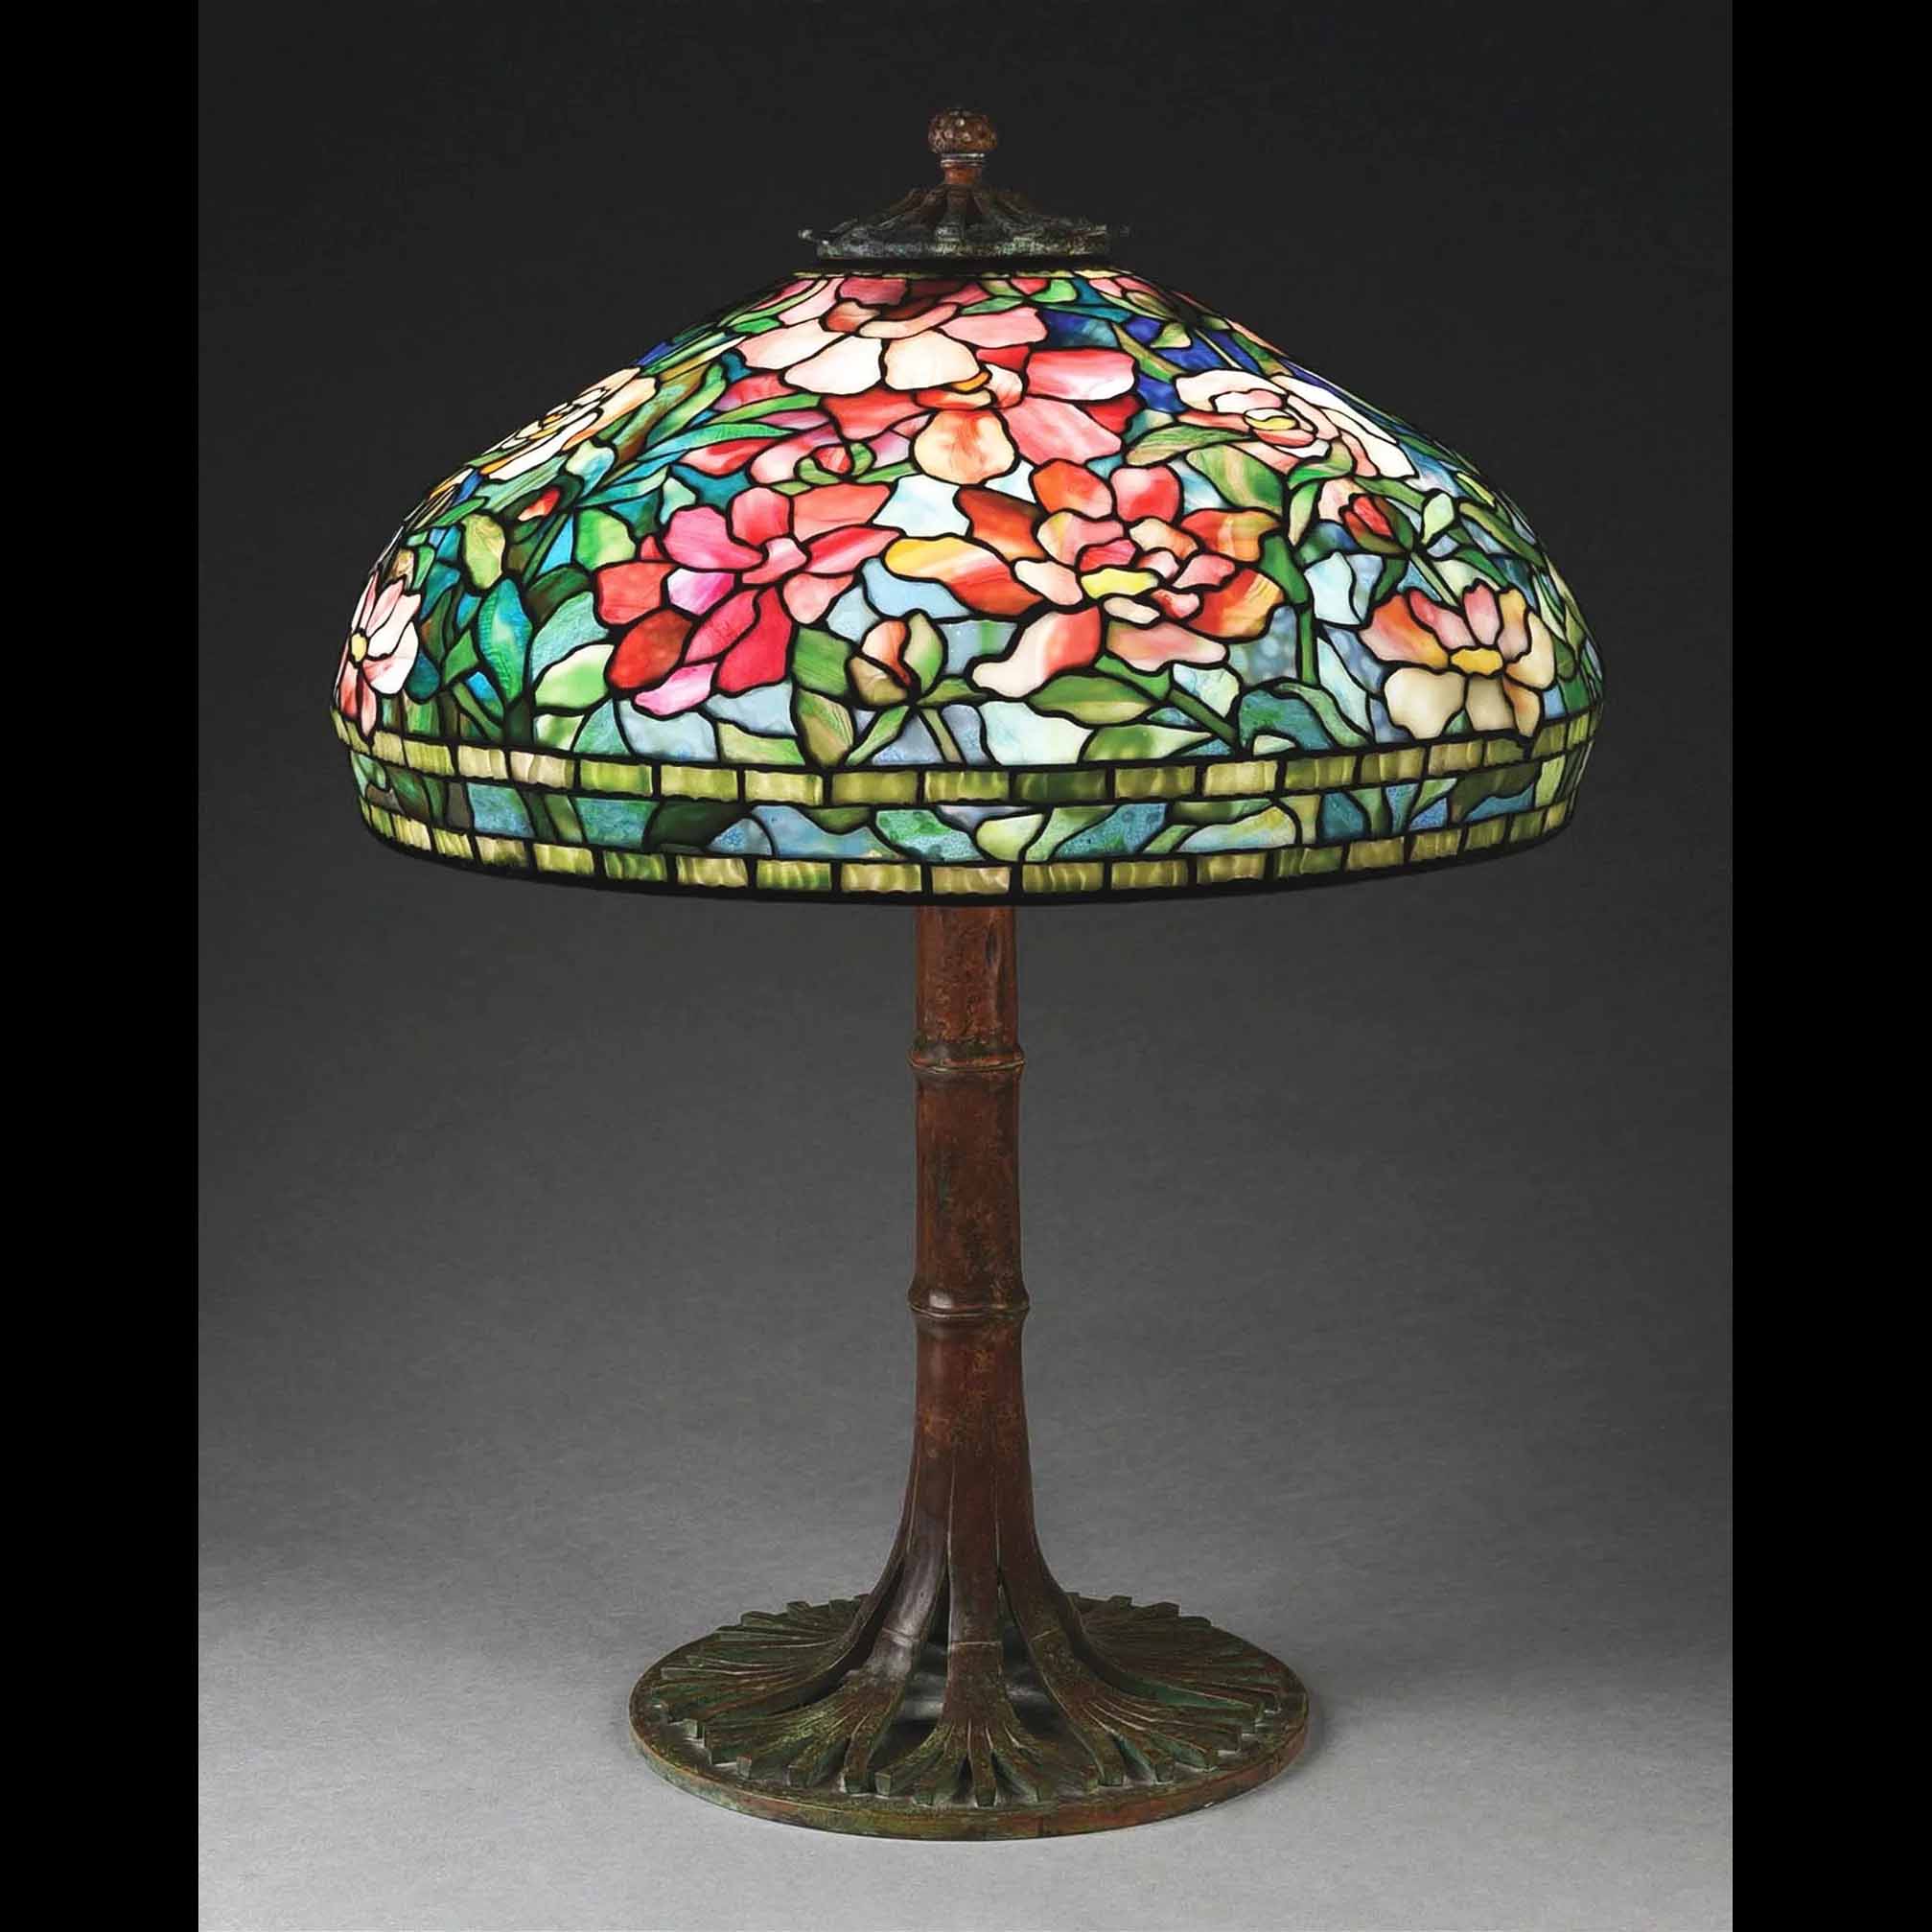 Morphy&#8217;s presents Tiffany lamps and early 20th century Americana June 11-12